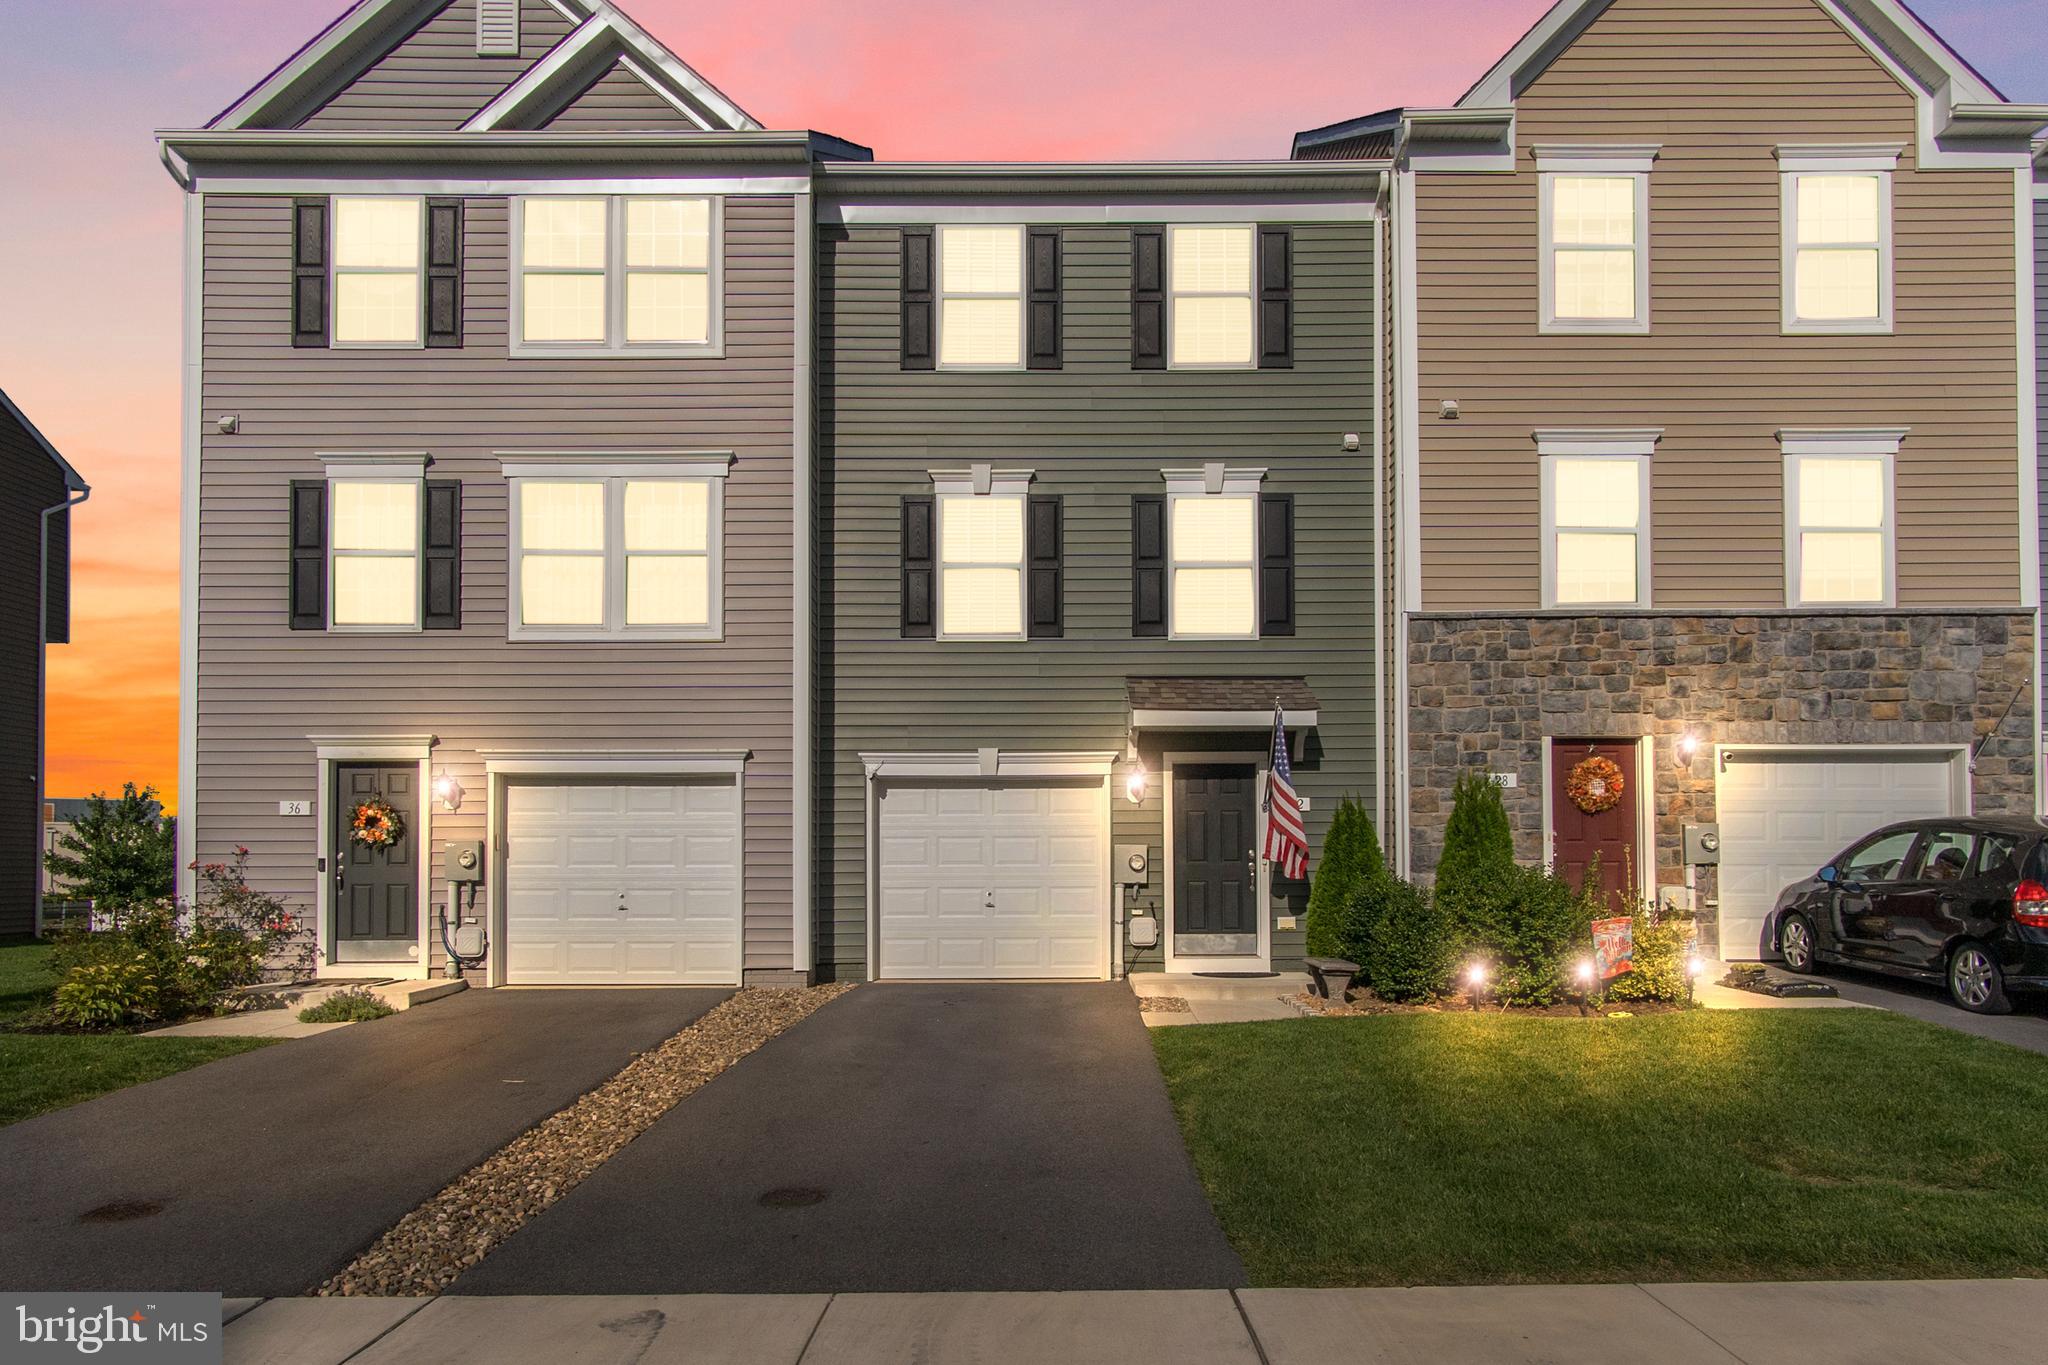 This 3 bedroom townhome has been beautifully maintained. It is nestled in the much sought after Bria